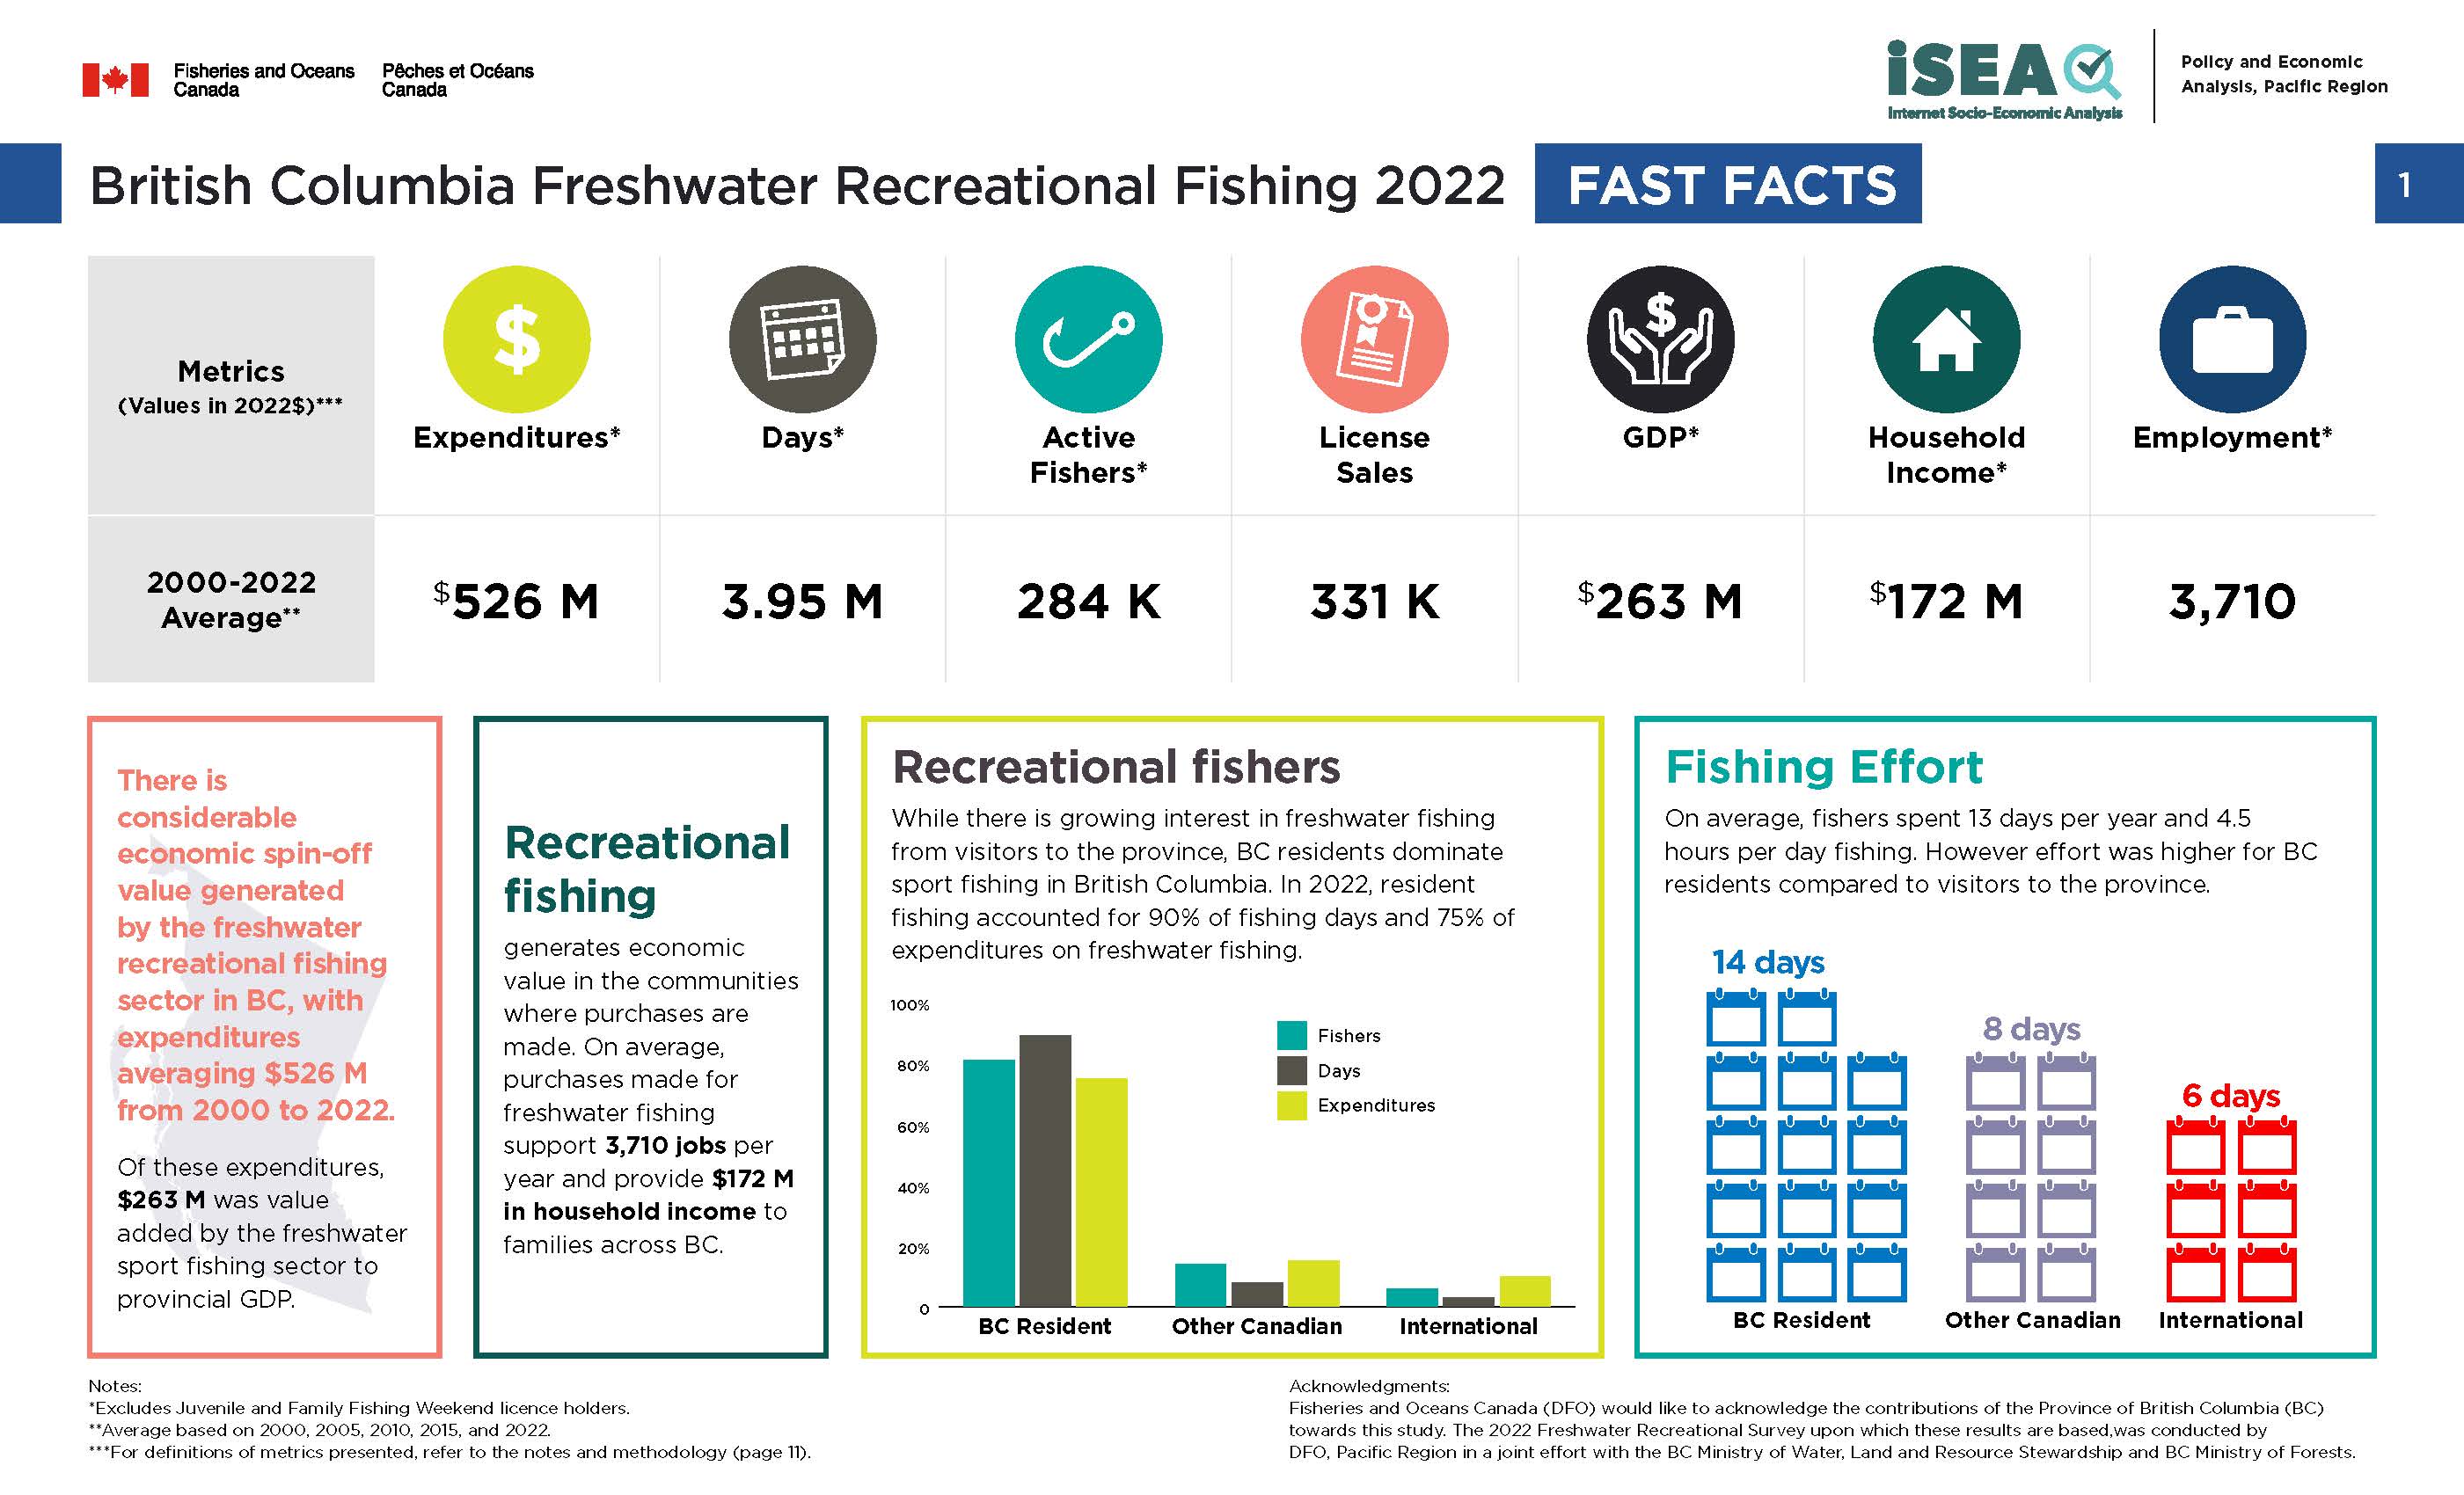 Photo: infographic of BC freshwater recreational fishing 2022, fast facts